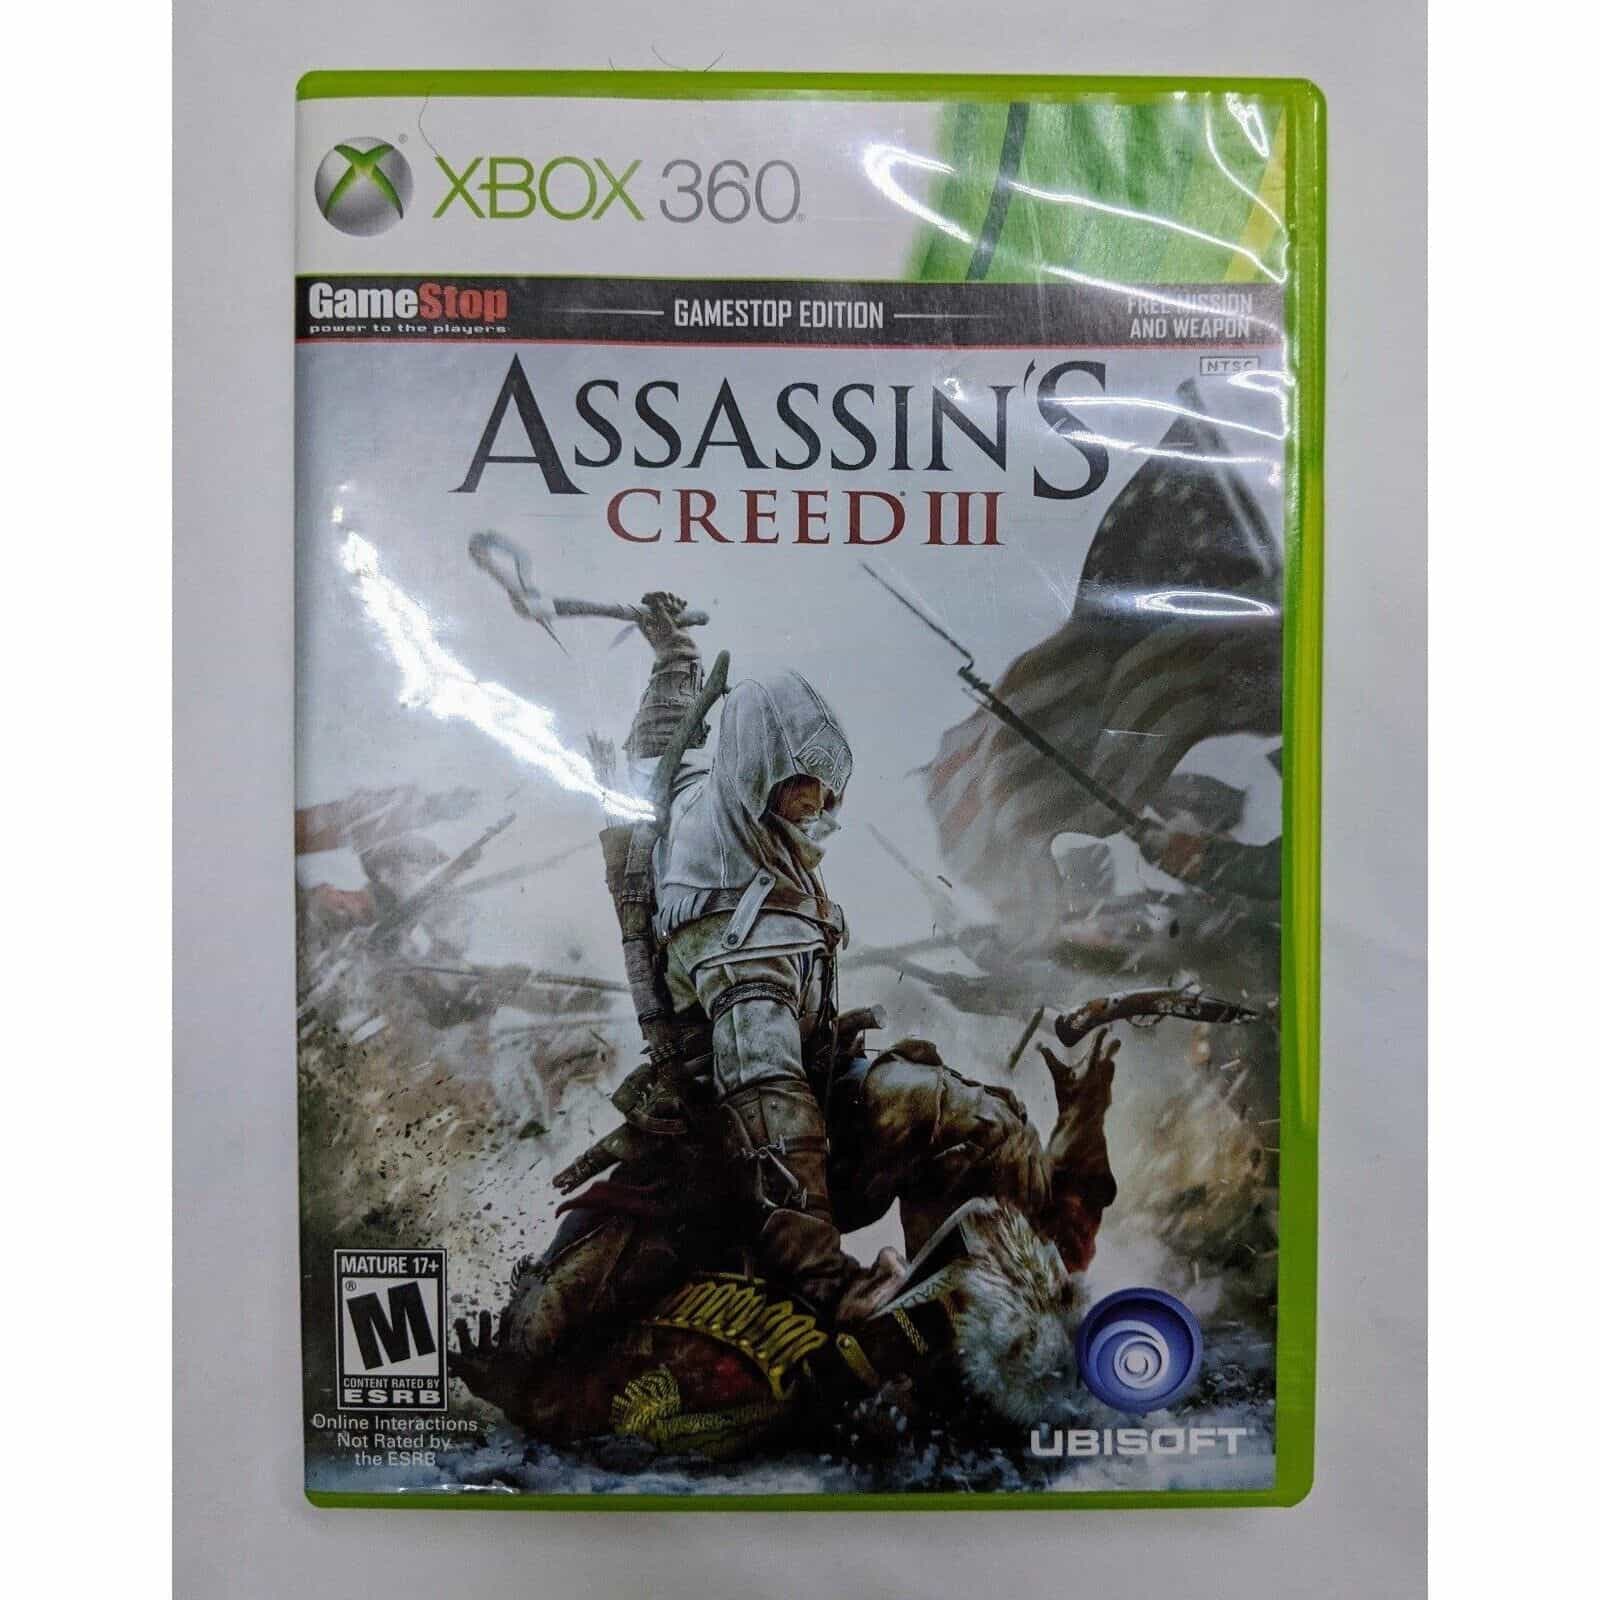 Assassin’s Creed III for Xbox 360